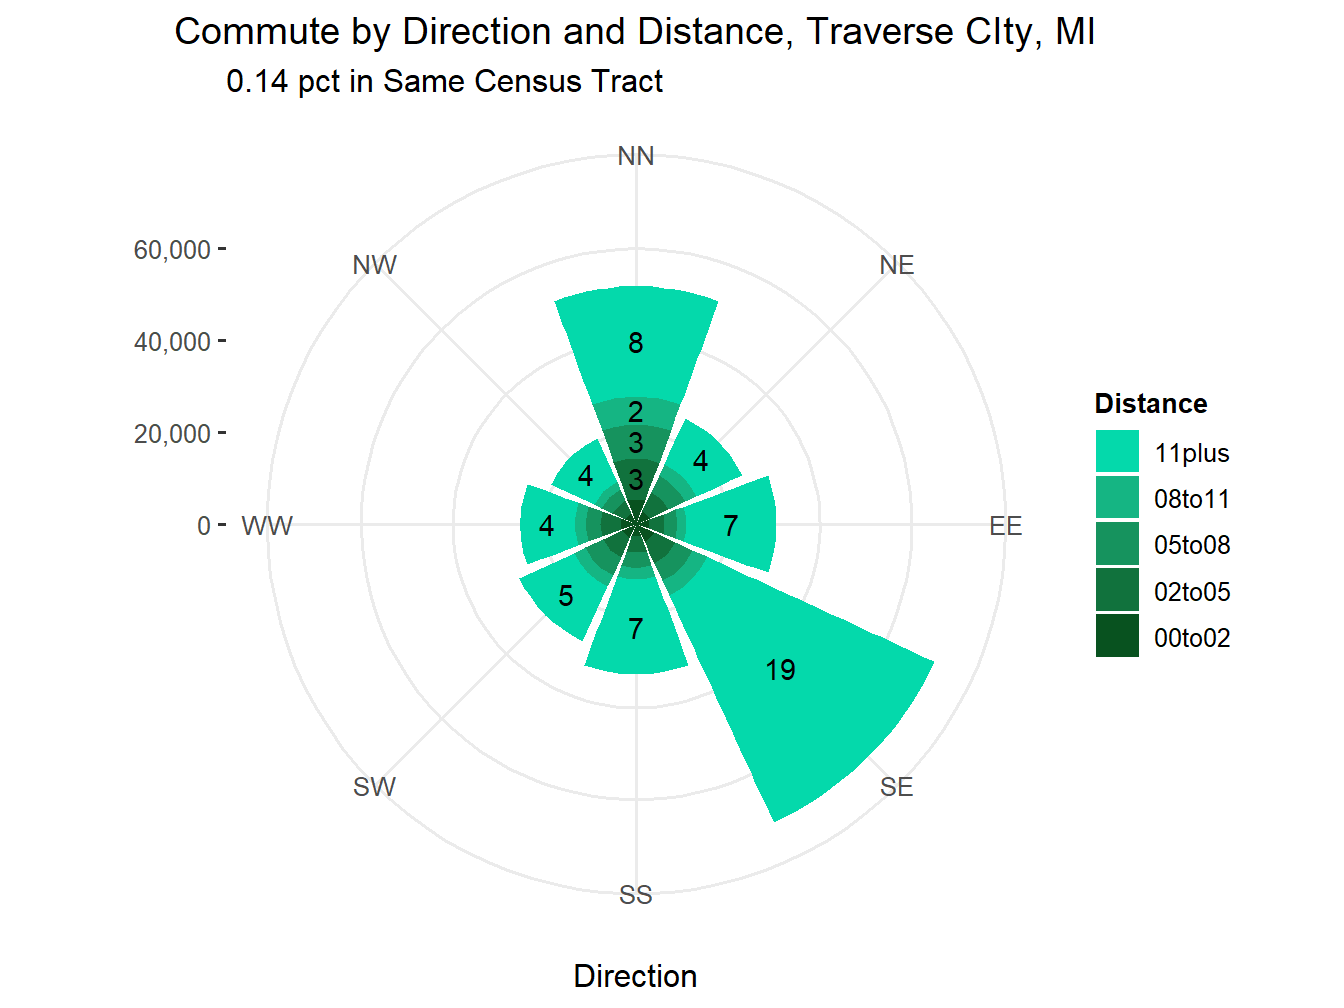 Commute Distance and Direction